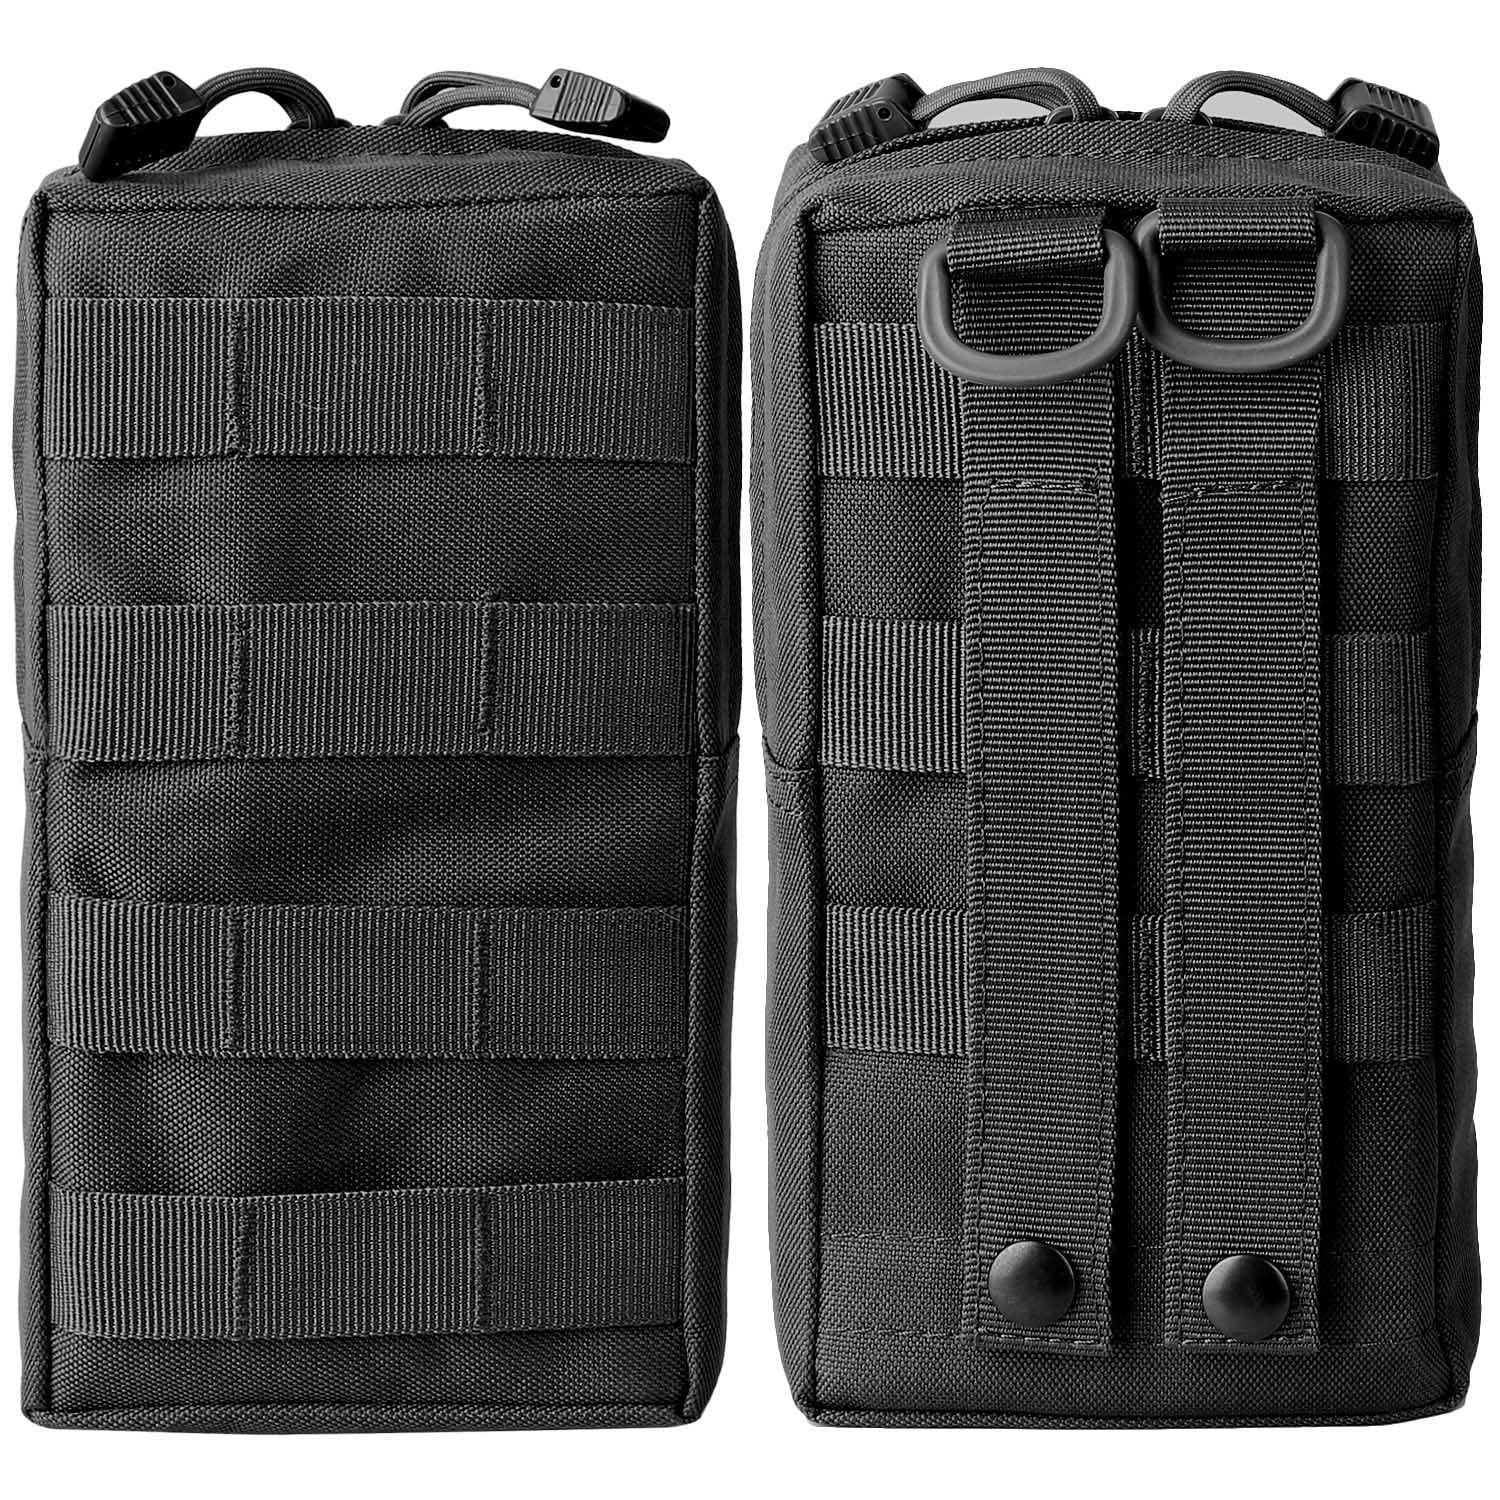 FRTKK 2 Pack Molle Pouches Tactical Compact Water-Resistant EDC Pouch Bag Small Utility Pouch 